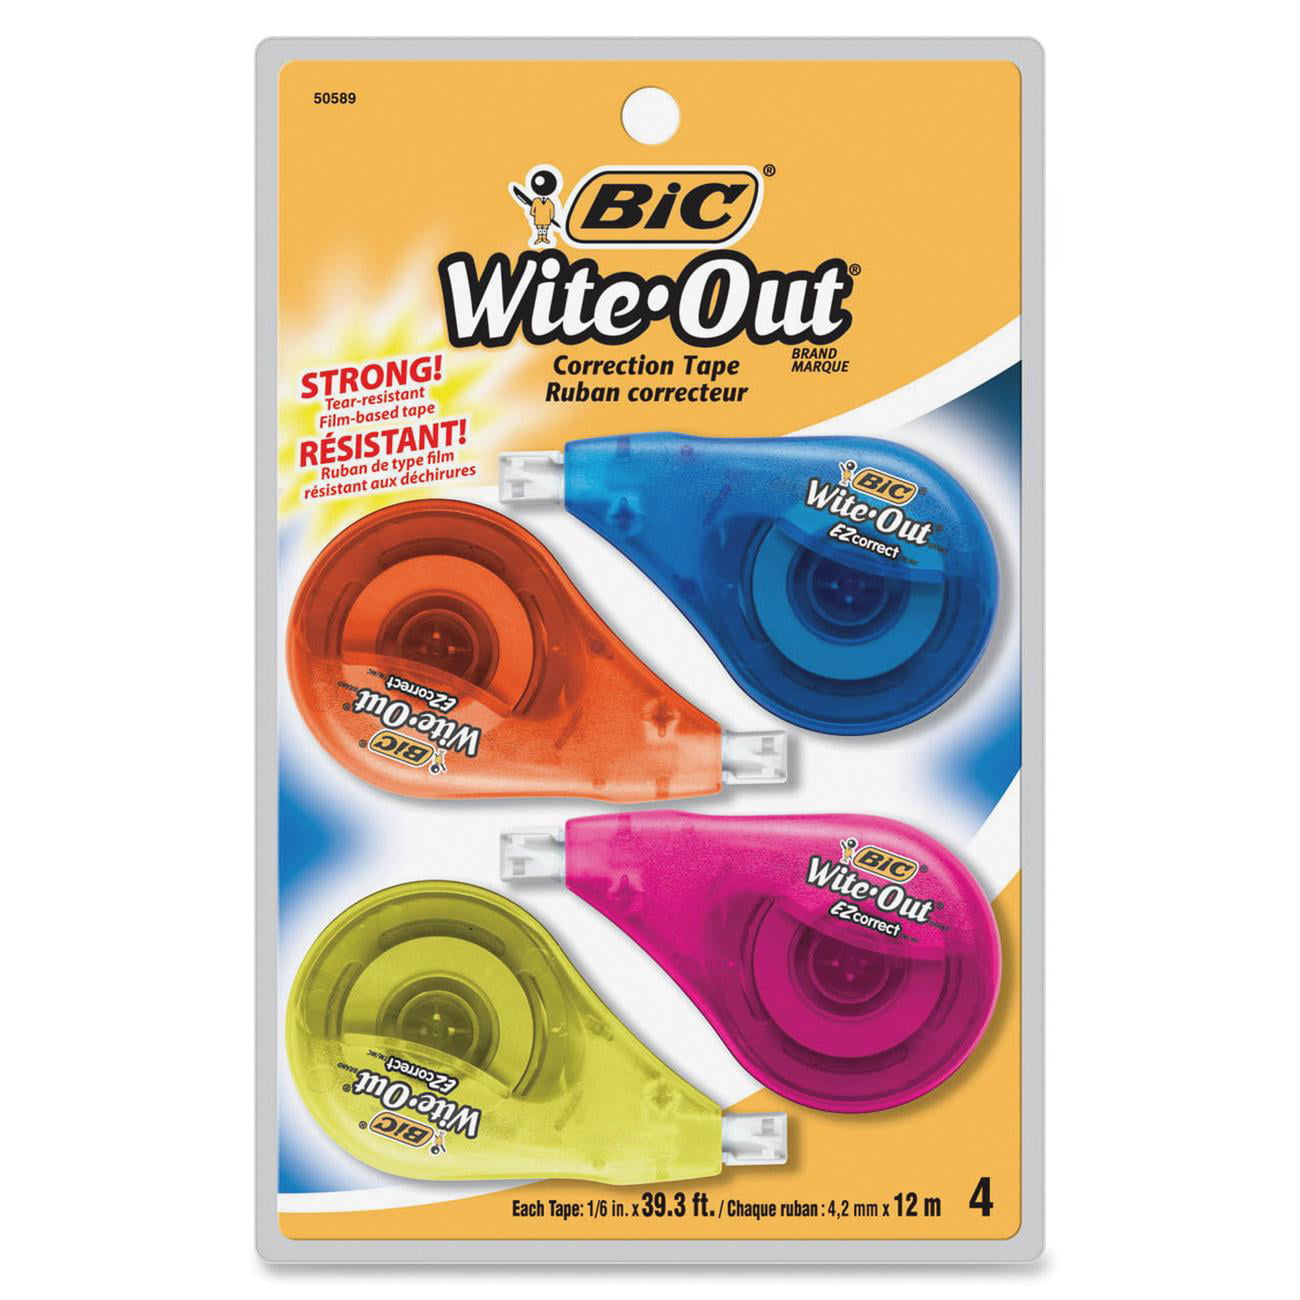 Bic Wite Out Brand Ez Correct Correction Tape White 4 Count Walmart